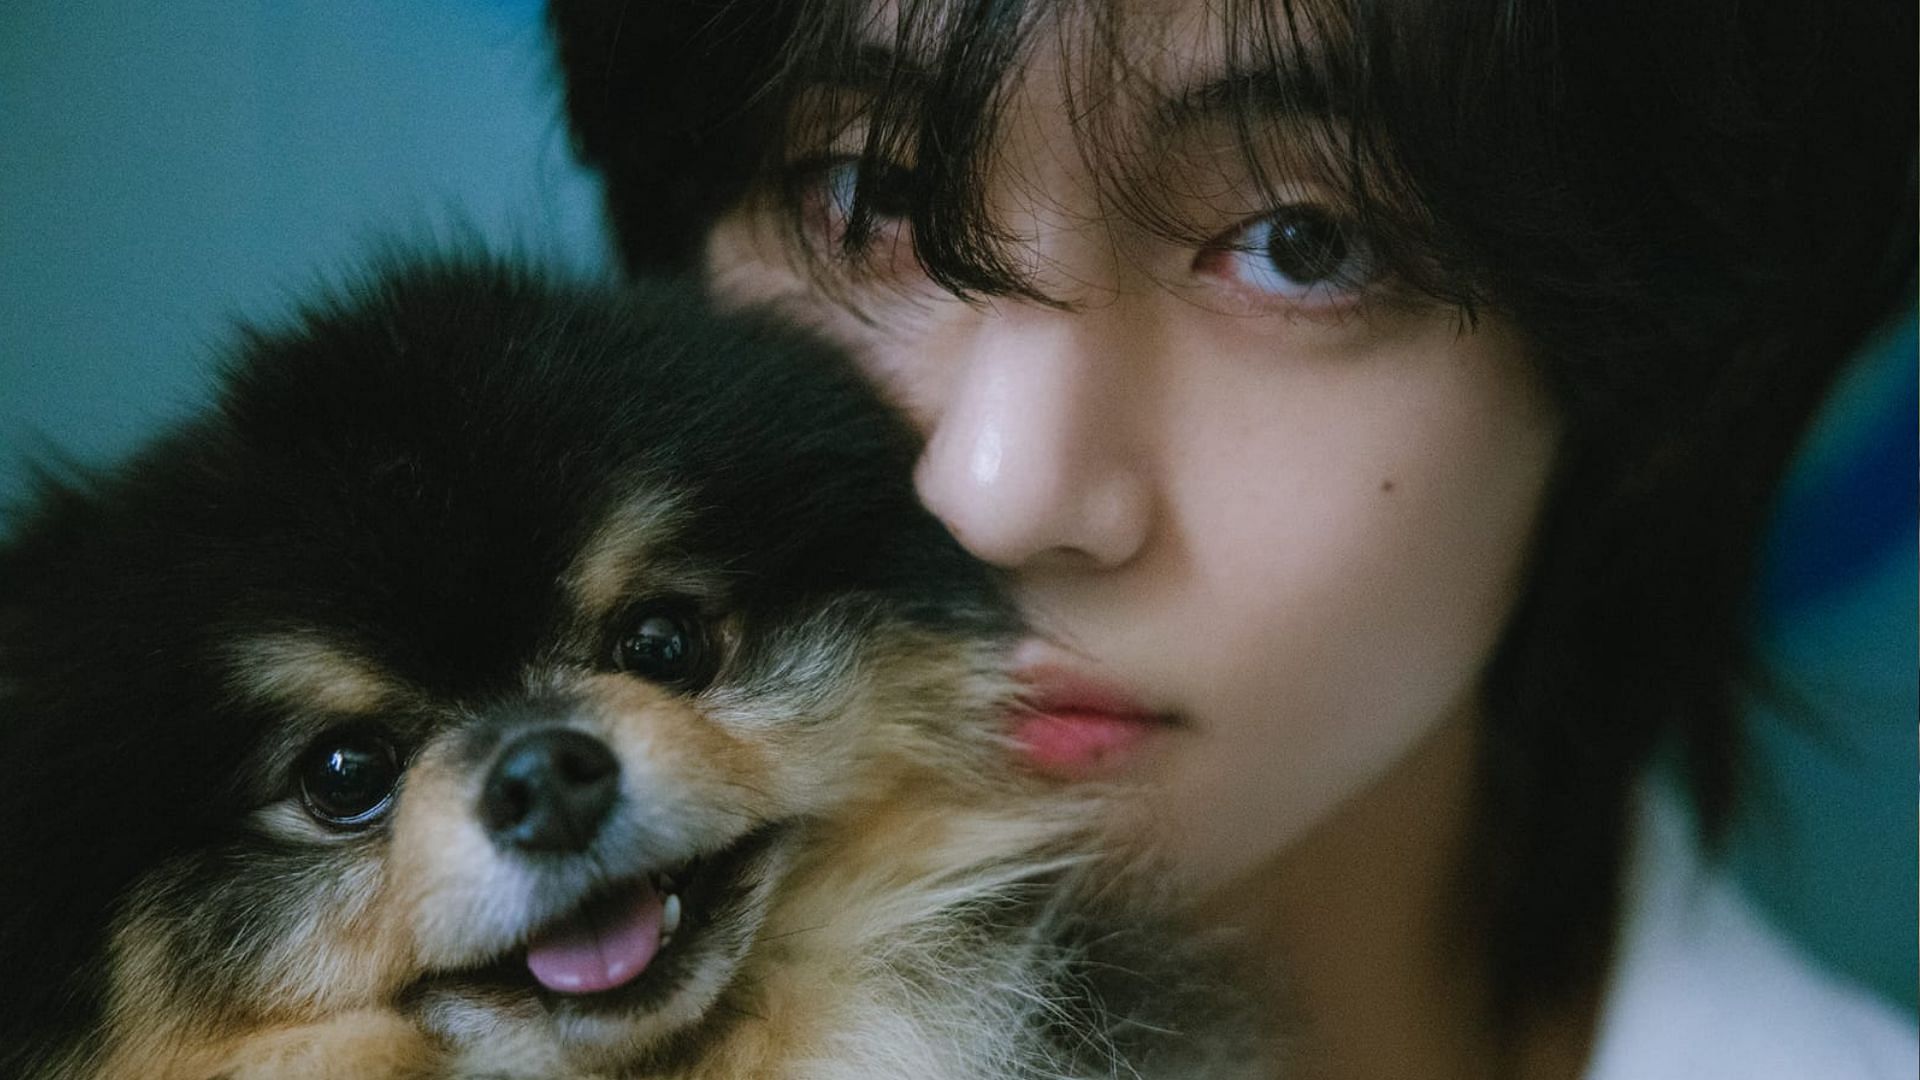 BTS member Kim Taehyung aka V to release his solo album 'Layover